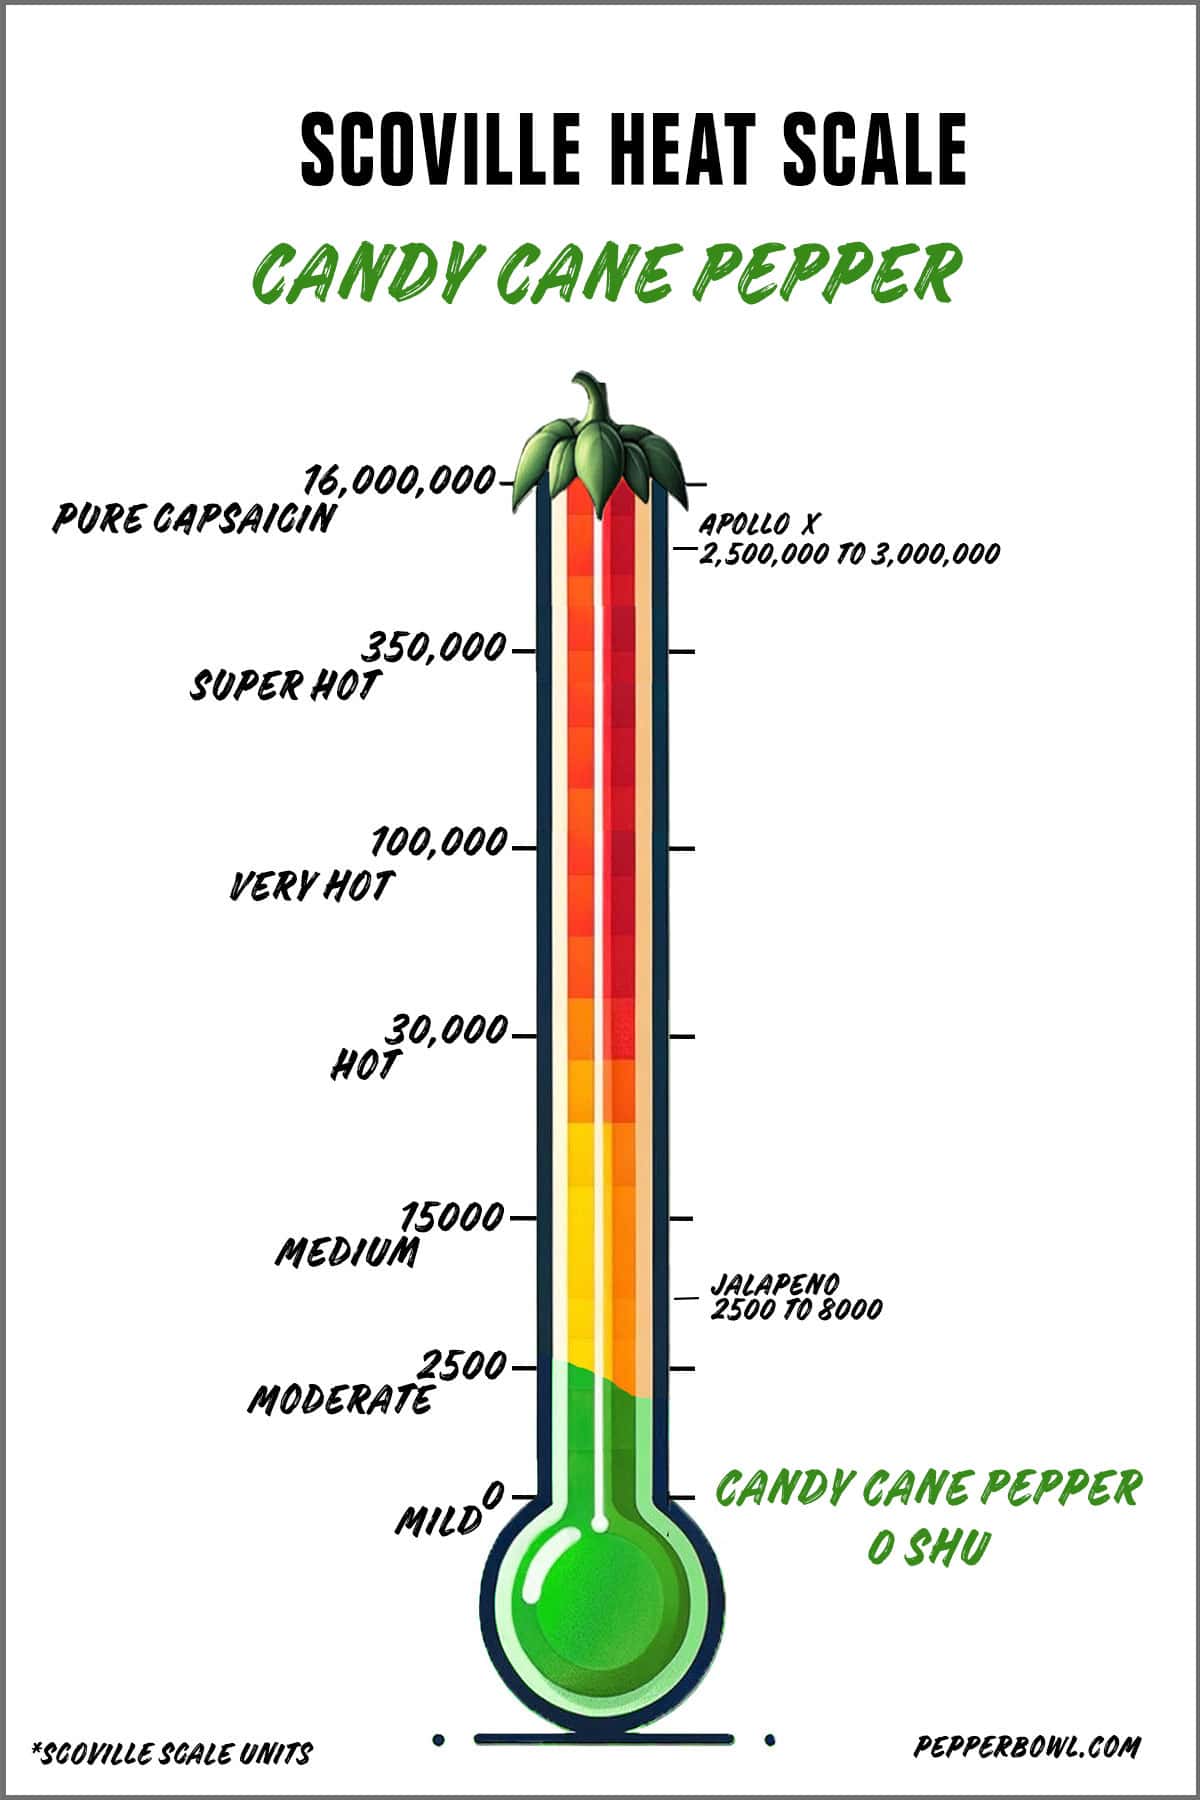 Illustration of the candy cane pepper in the Scoville scale, representing its heat intensity.